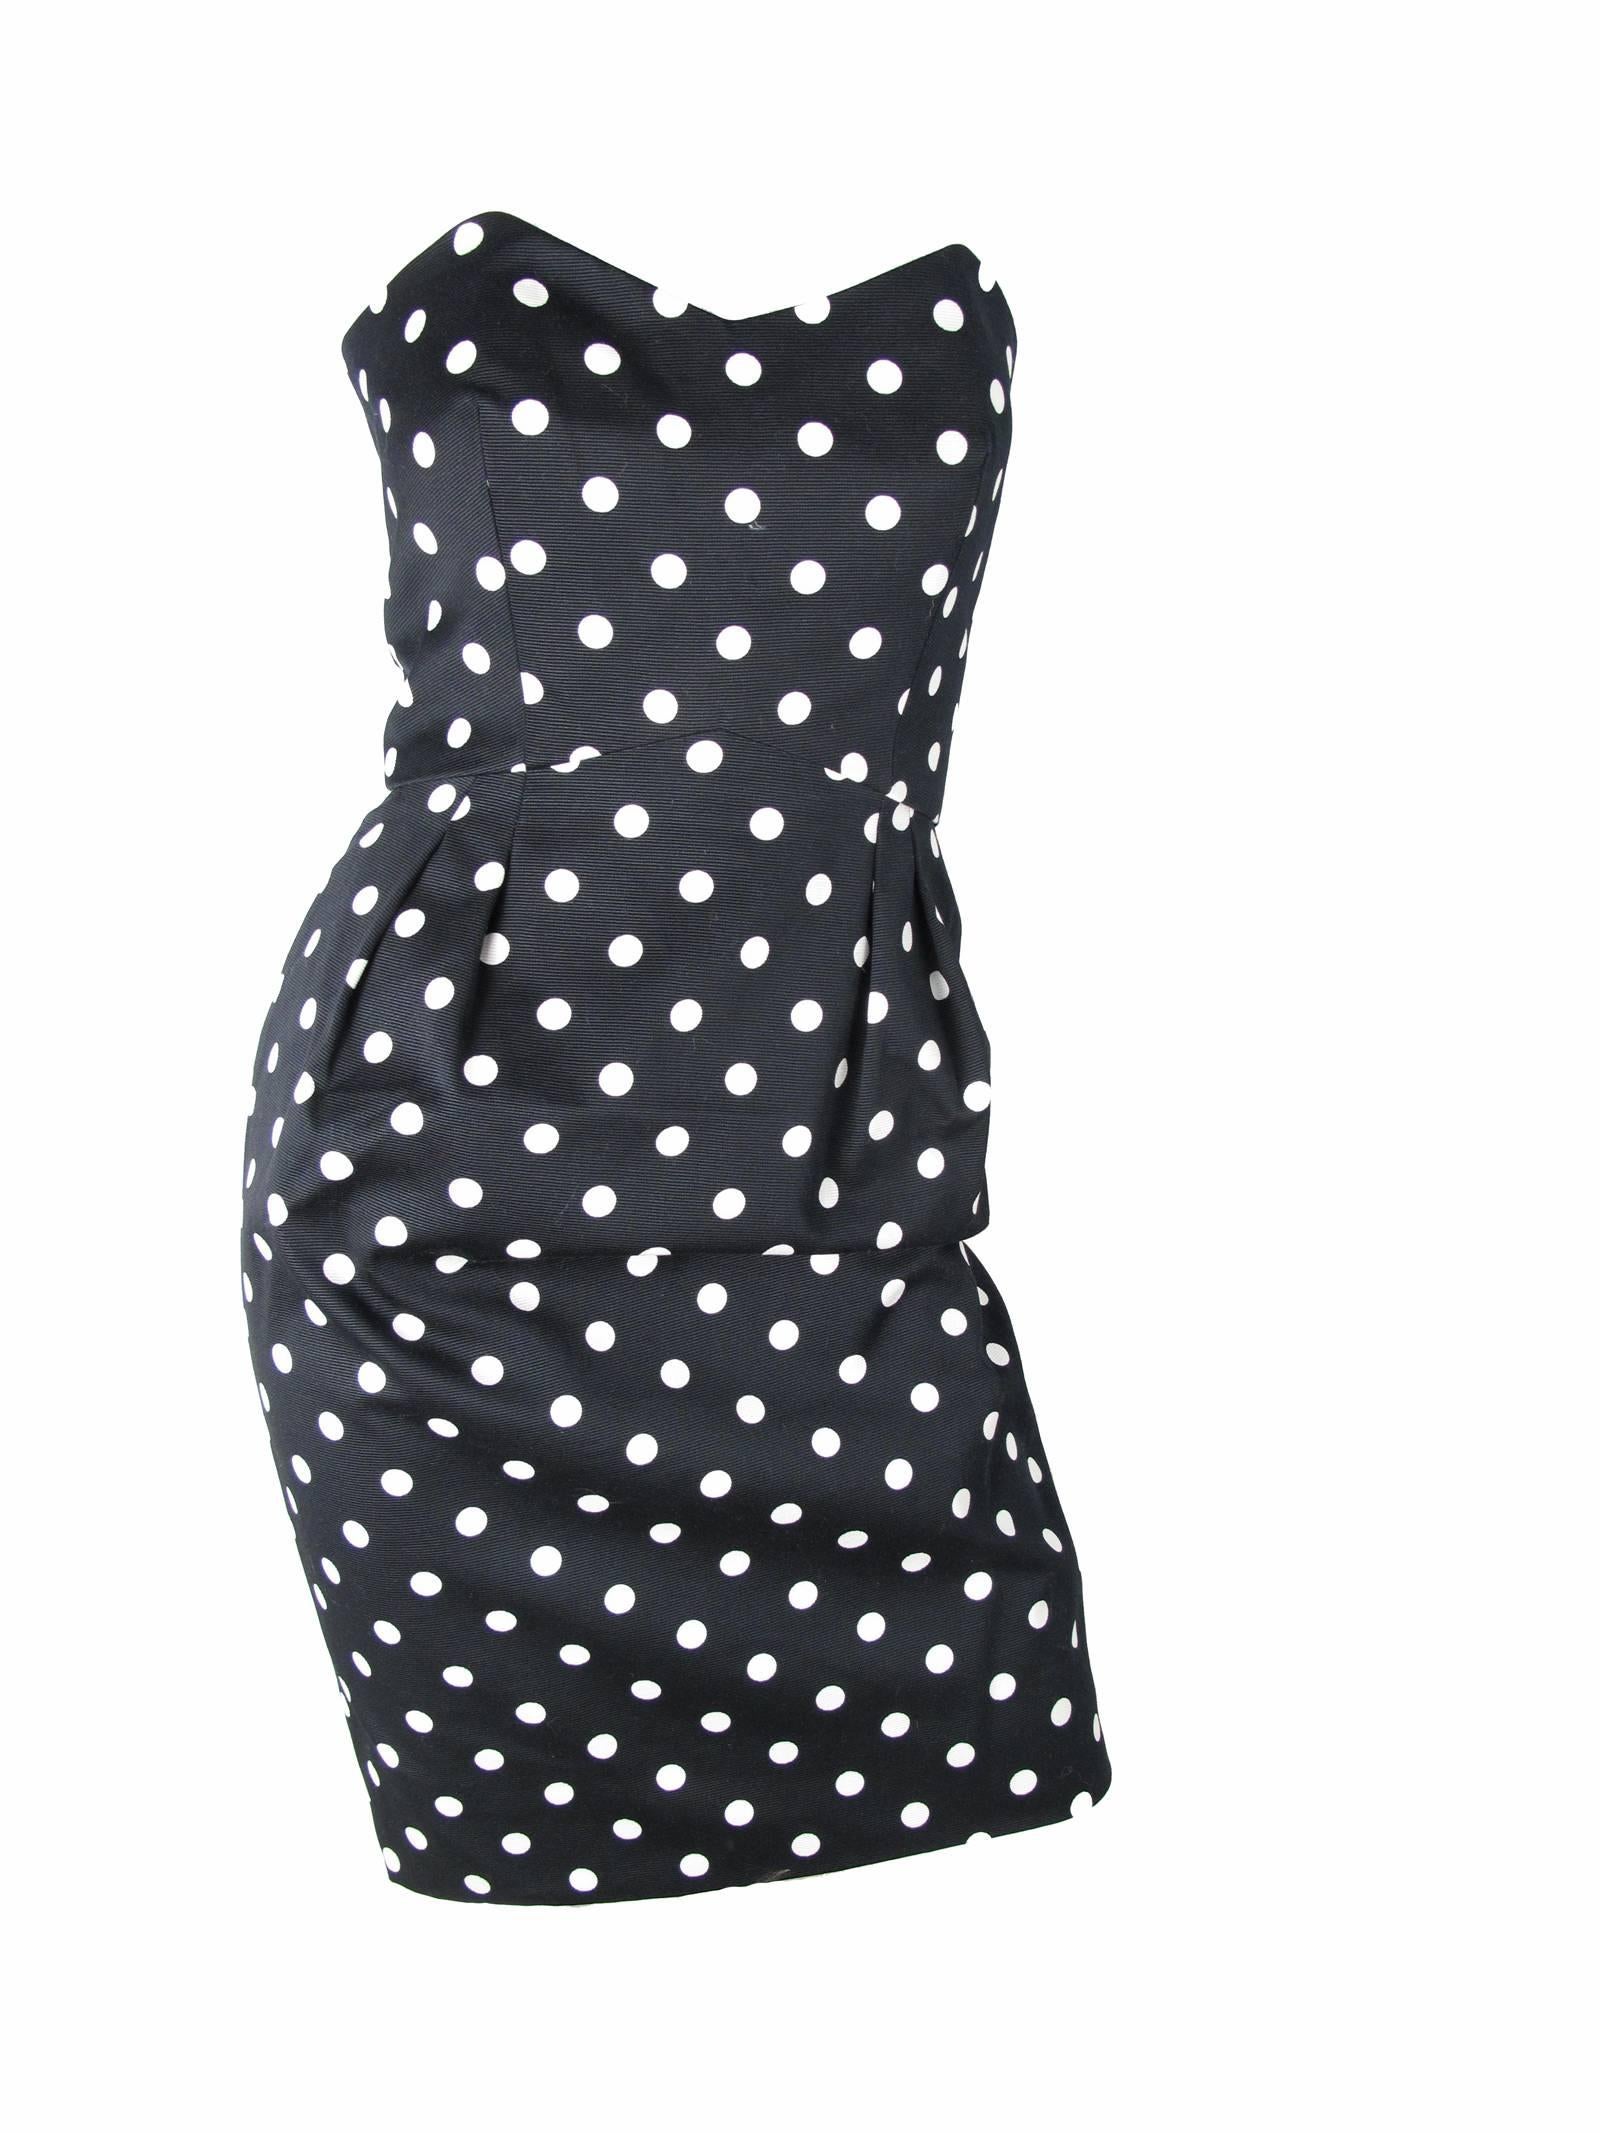 Guy Laroche black and white cotton strapless polka dot dress. Too small for mannequin, did not zip all the way up, see photos. Size 36/ current US 4 

We accept returns for refund, please see our terms.  We offer free ground shipping within the